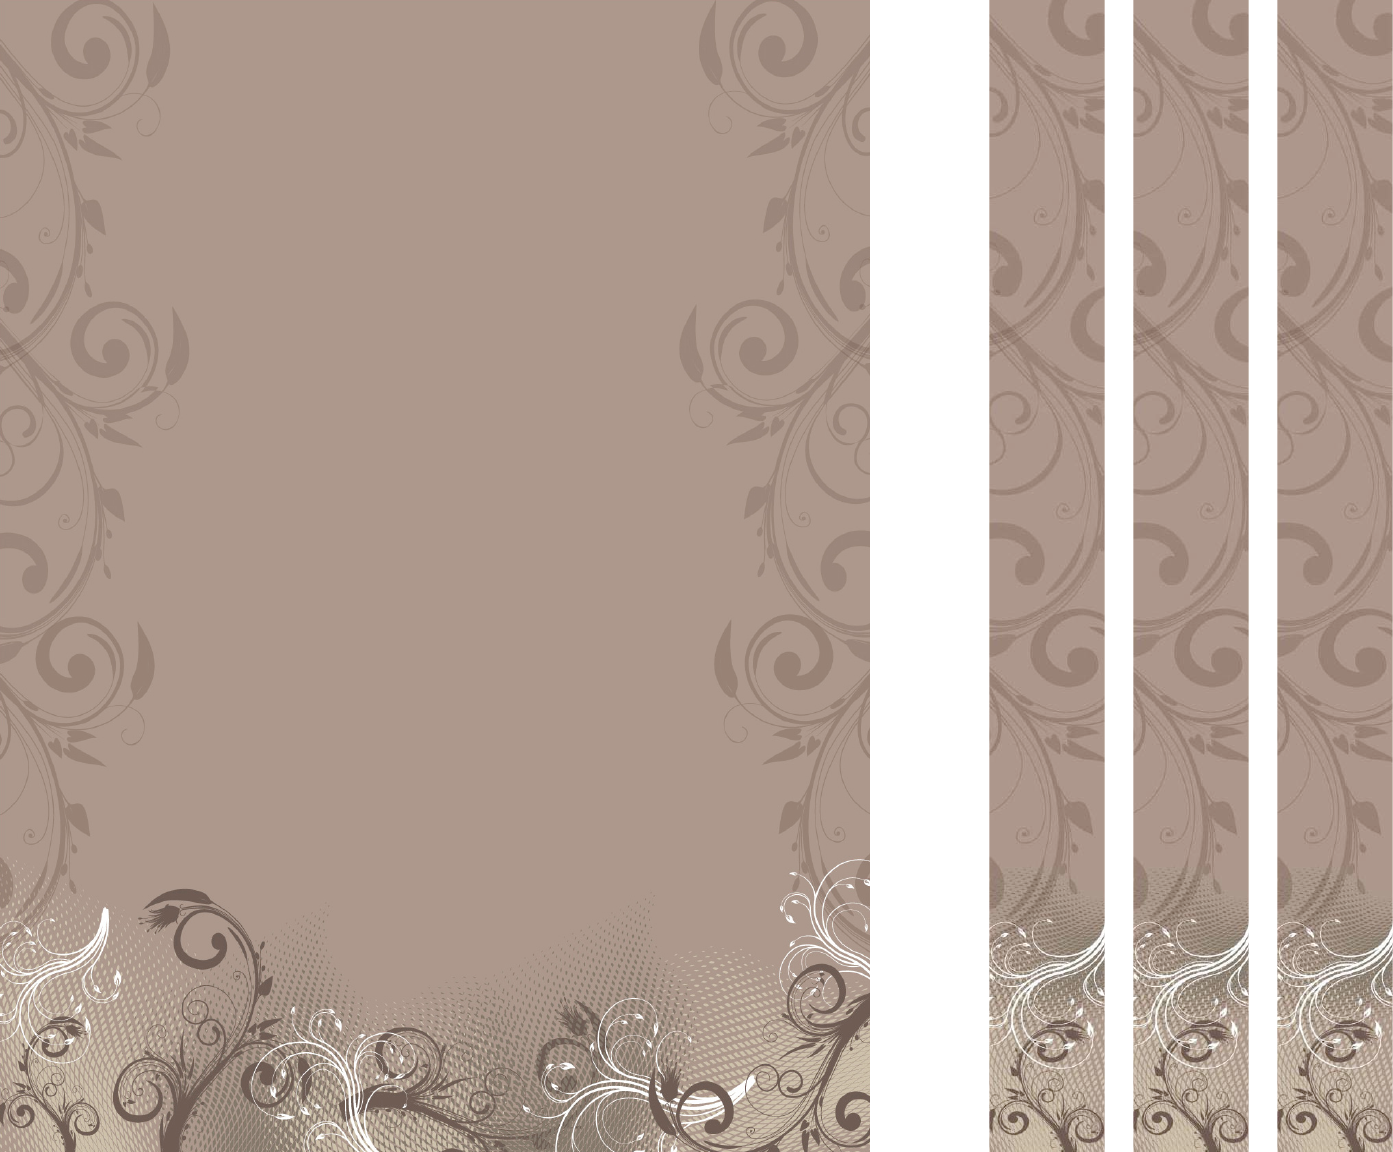 Binder Cover Templates 1